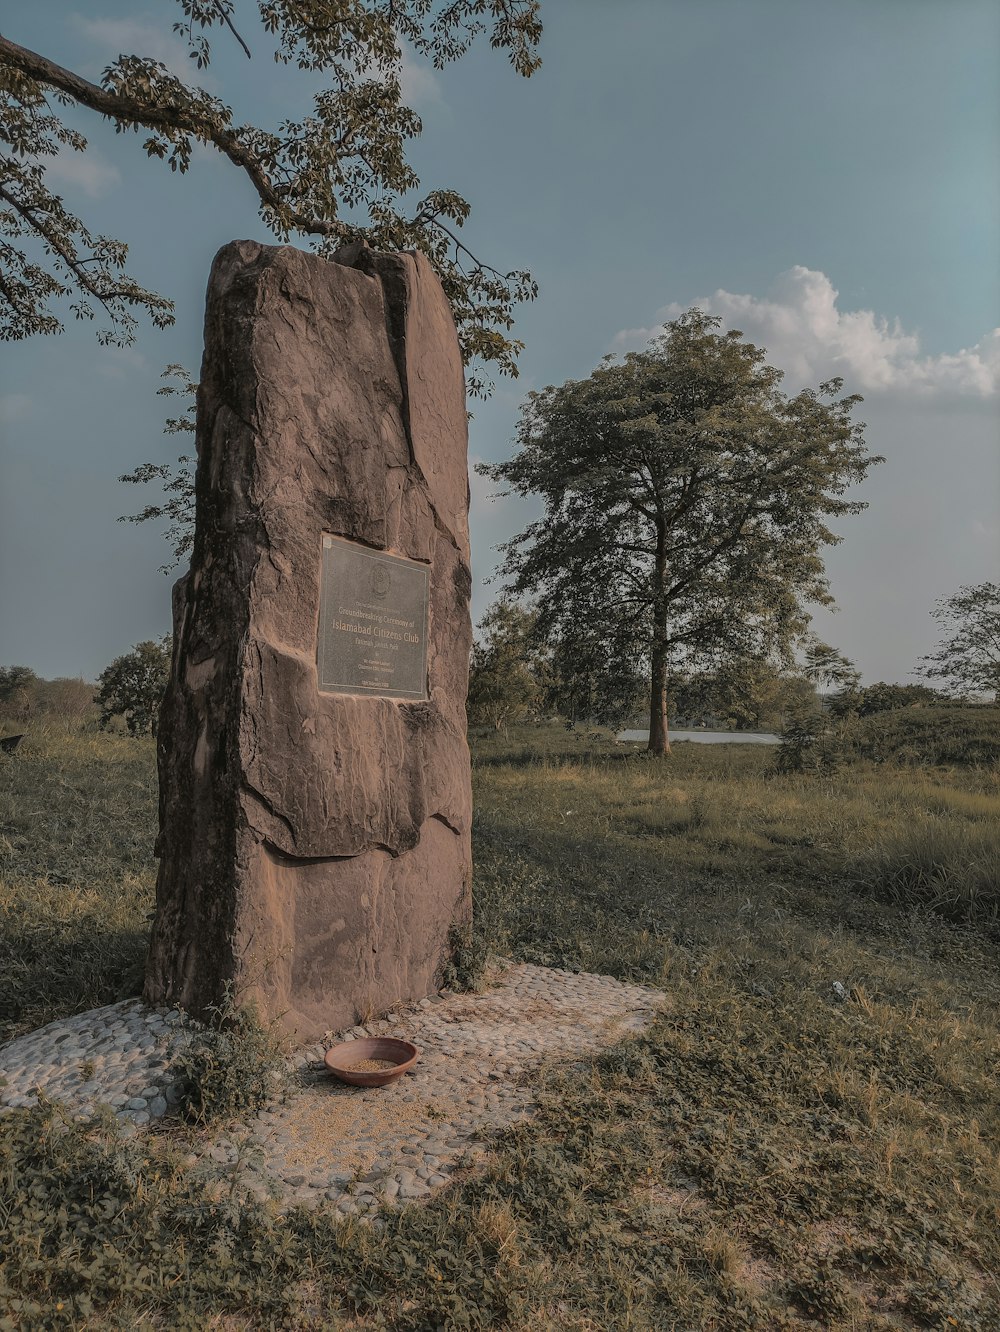 a large rock with a plaque on it in a field